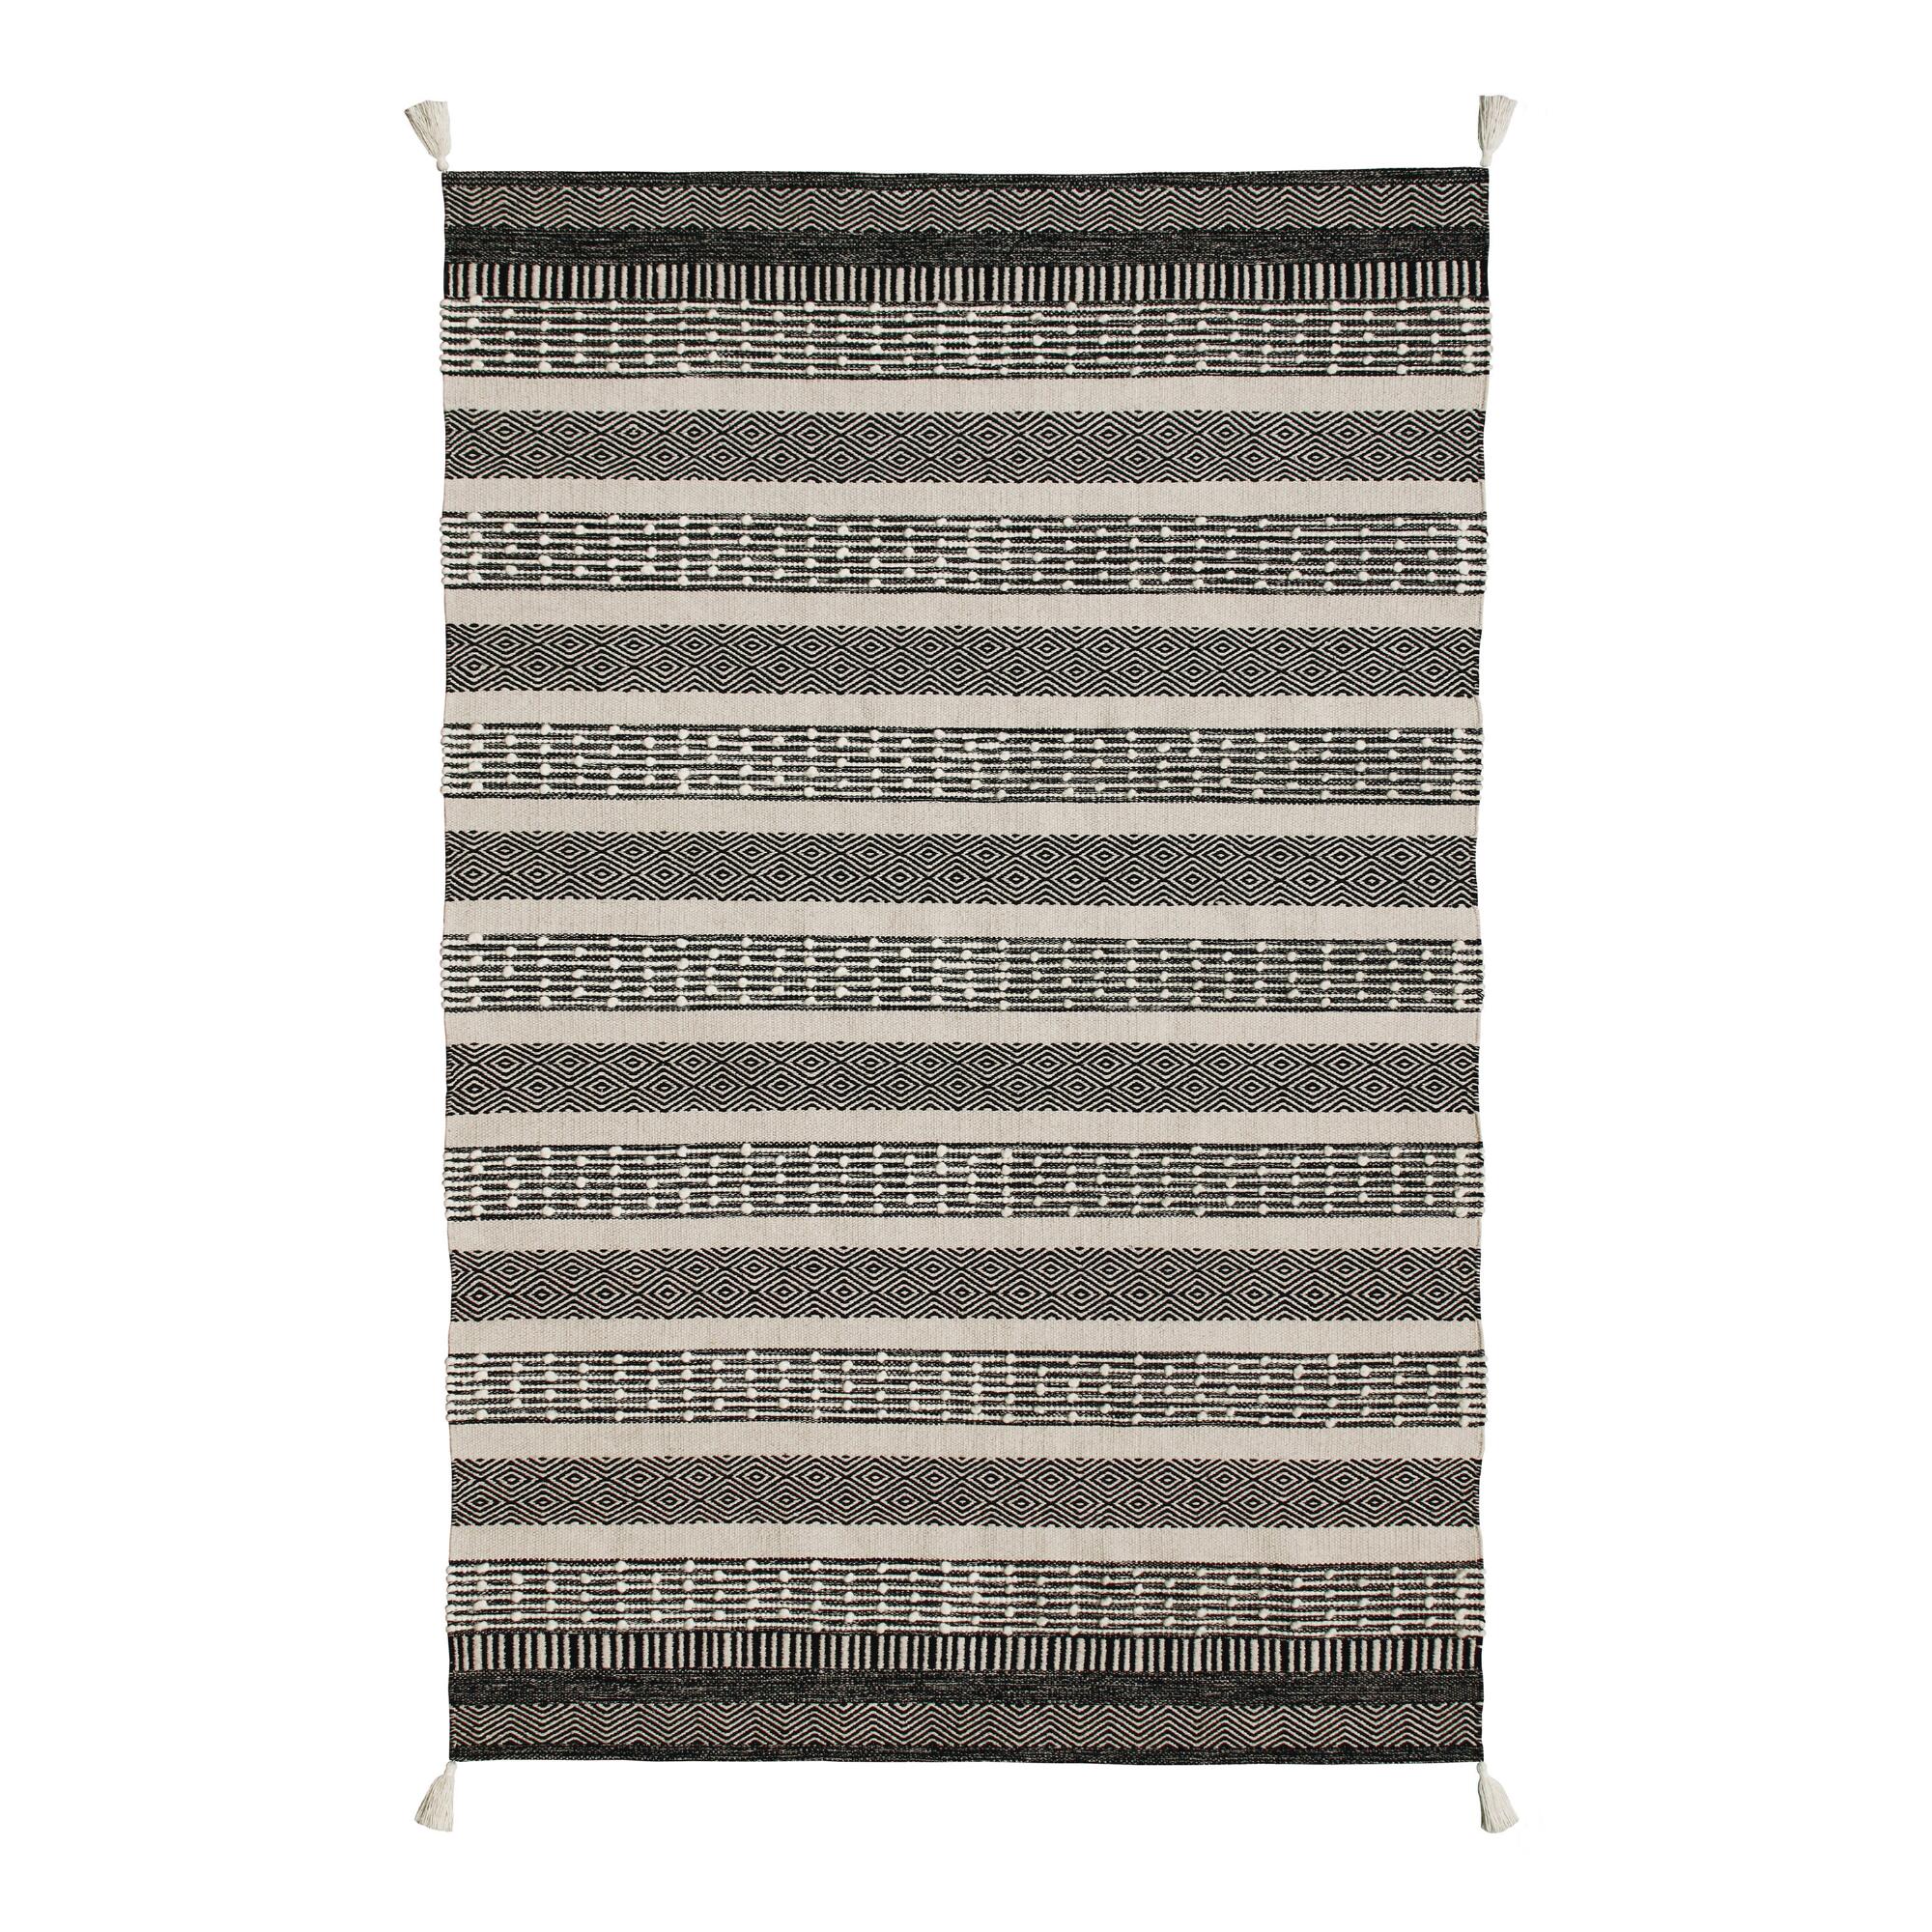 Geometric Striped Cotton and Wool Levi Area Rug: Black - 5' x 8' by World Market